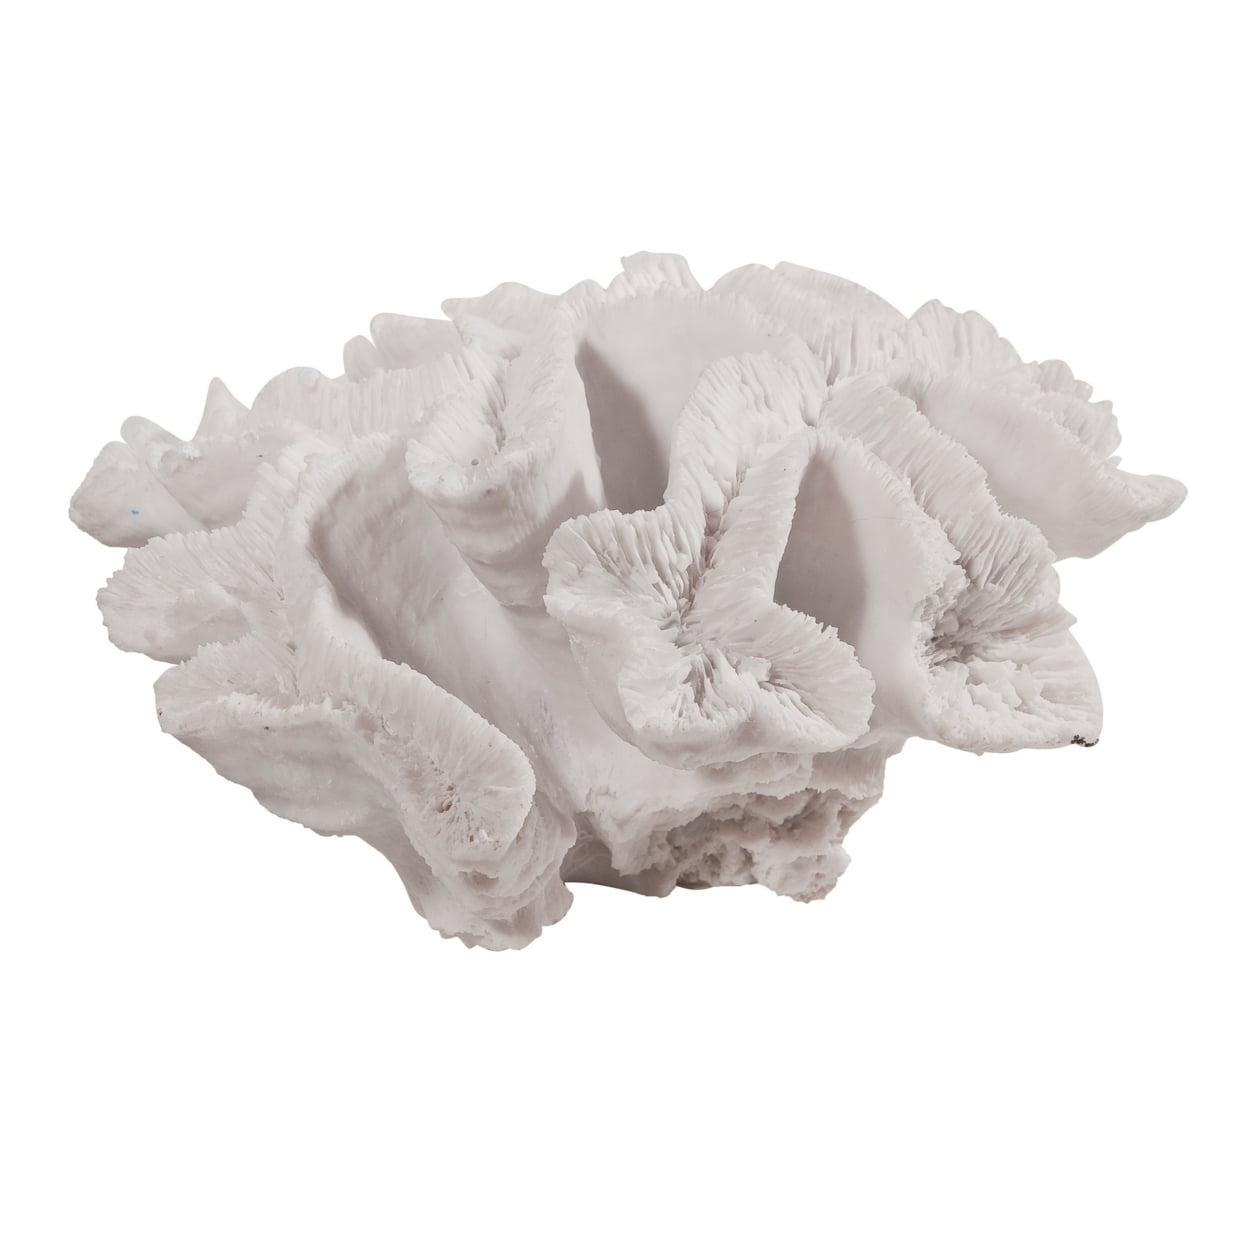 Picture of Benjara BM284969 9 in. Lily Faux Coral Table Figurine, Polyresin Textured Sculpture - White